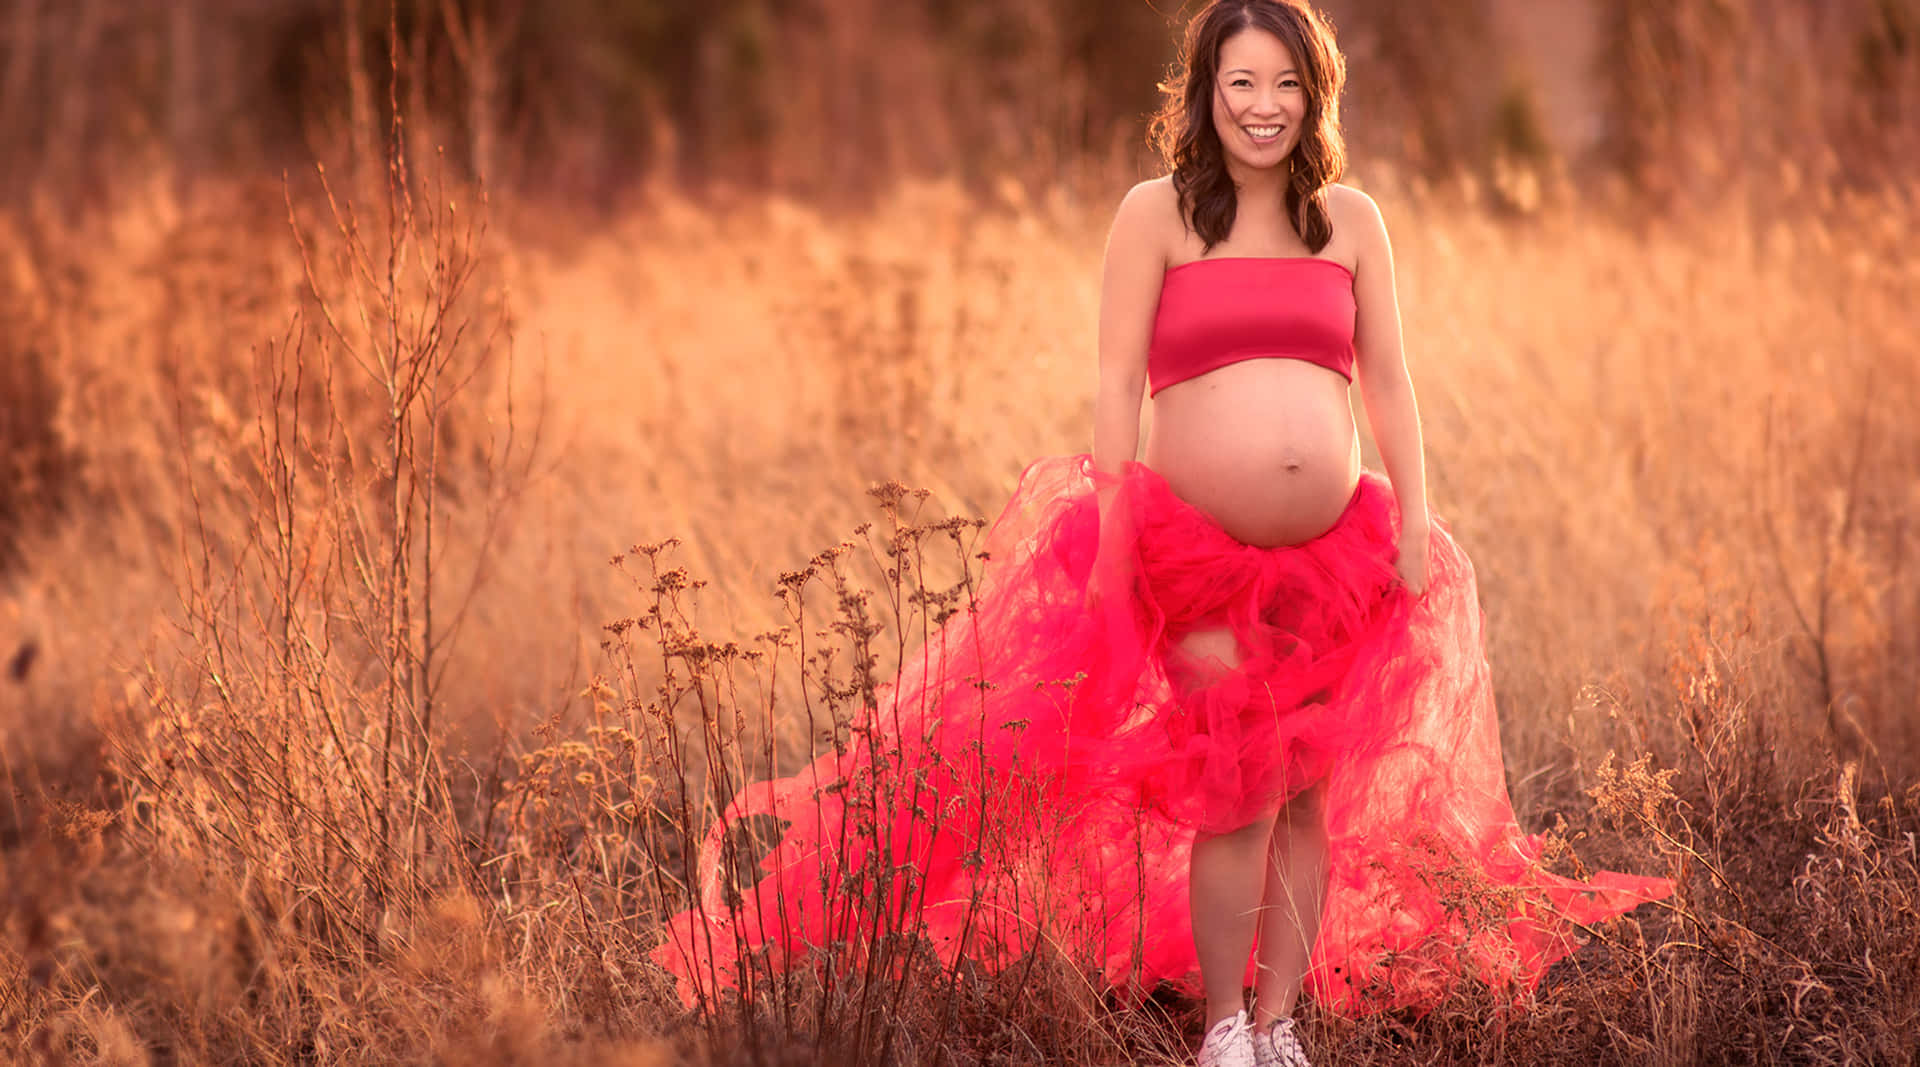 Radiant Expecting Mother - Cherishing Special Maternity Moments